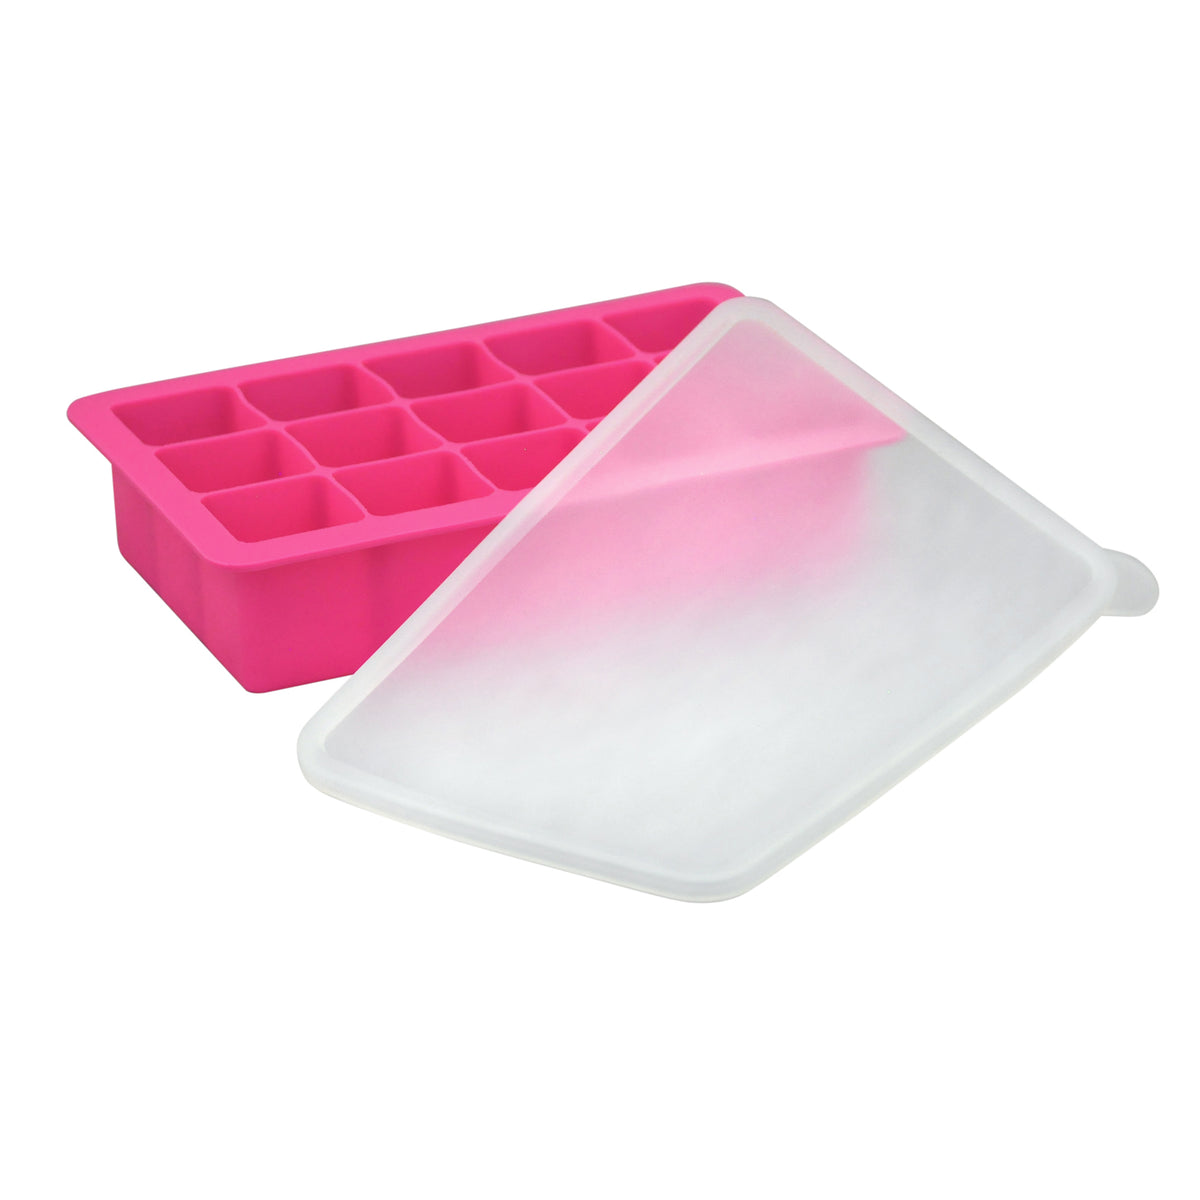 green sprouts Silicone fresh baby food freezer tray - Green